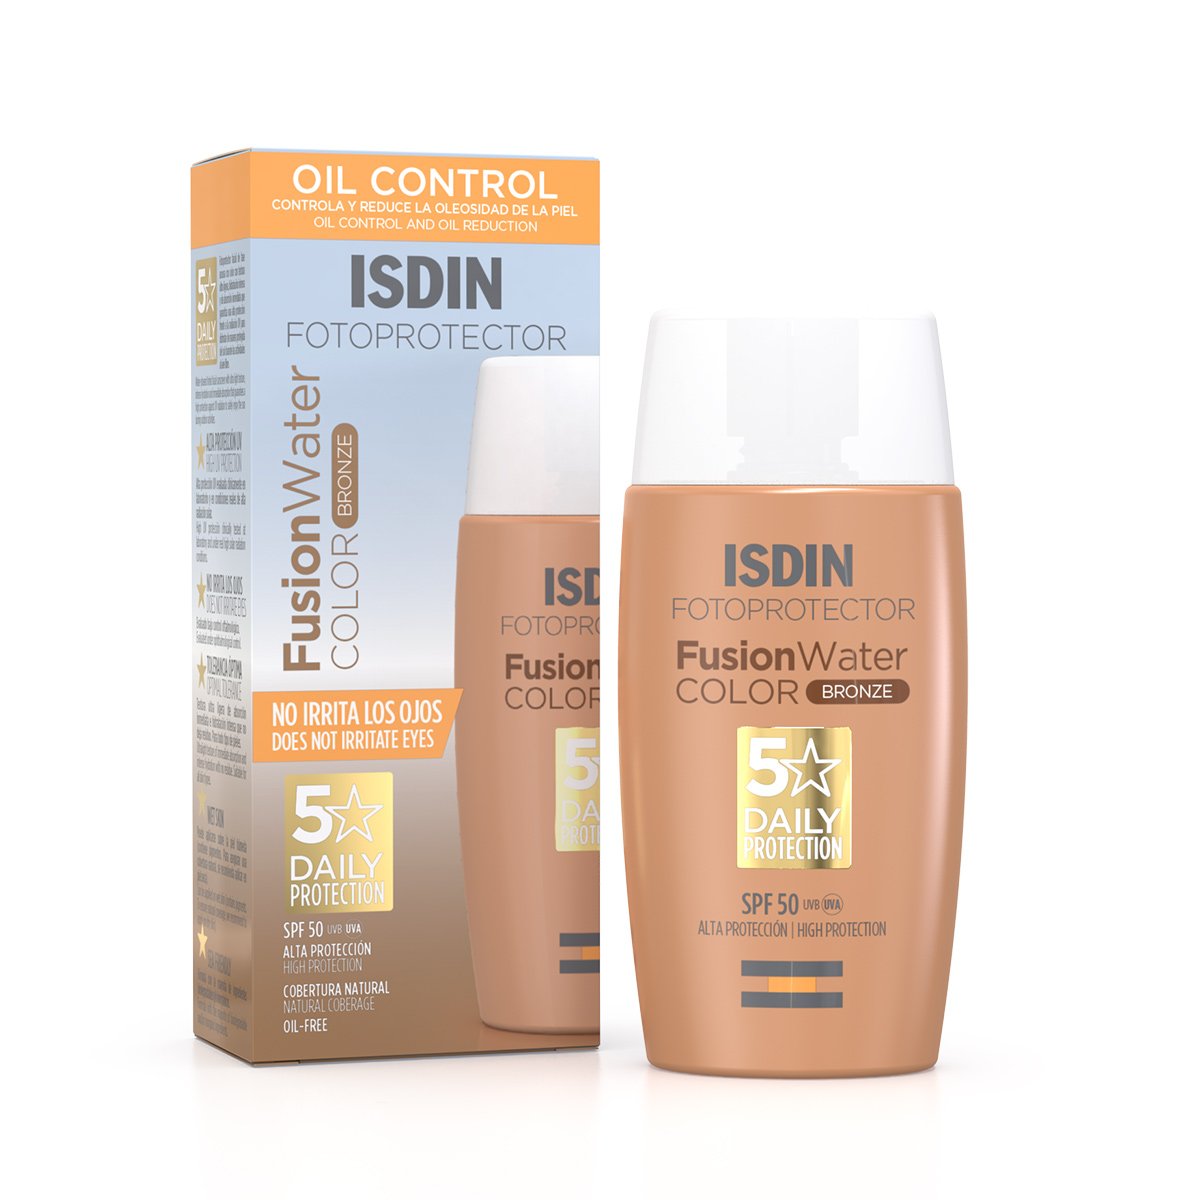 Fotoprotector isdin Fusion Water Color Bronze 50ml